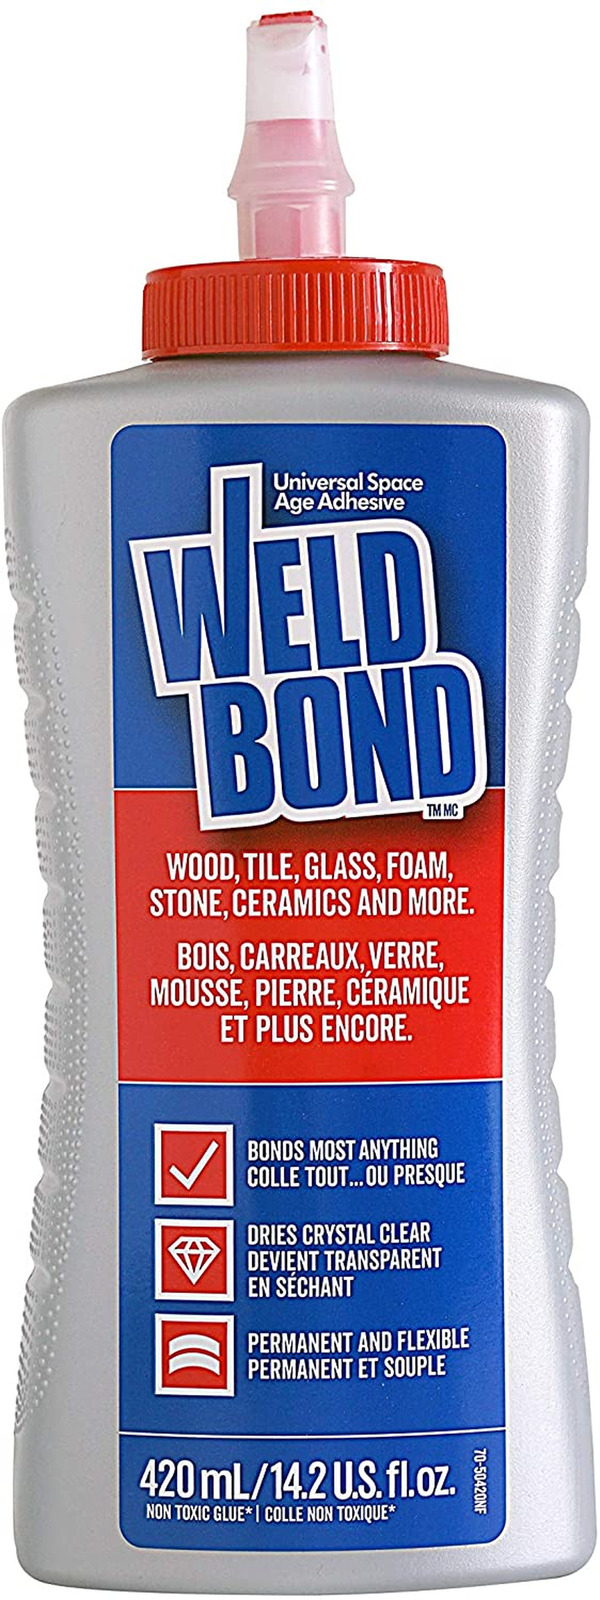 Weldbond Multi-Surface Adhesive Glue, Bonds Most Anything. Use as Wood...